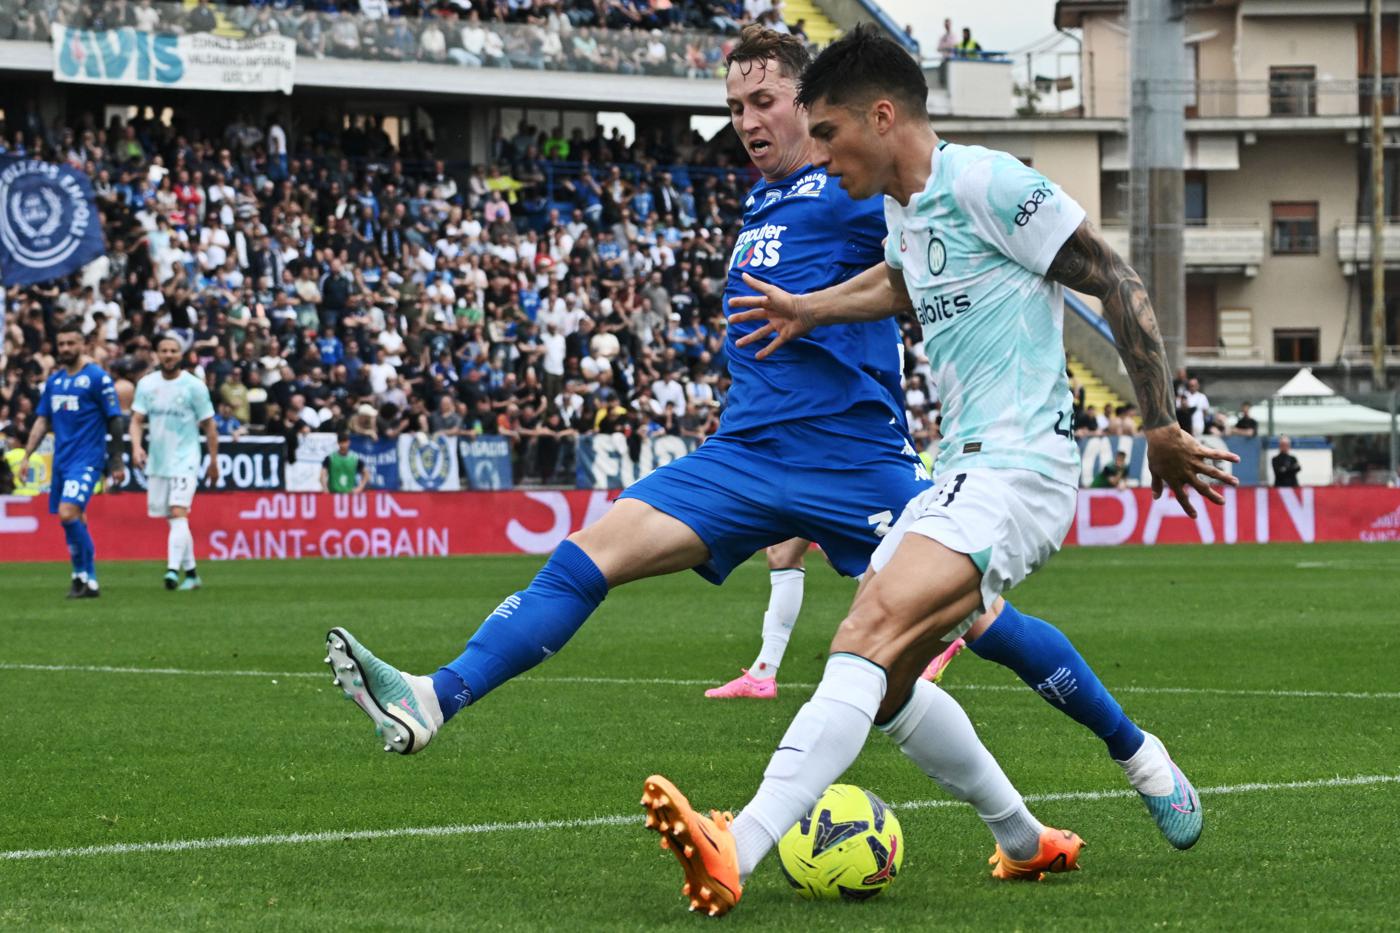 Empoli - Inter: where to watch, online broadcast (April 23)